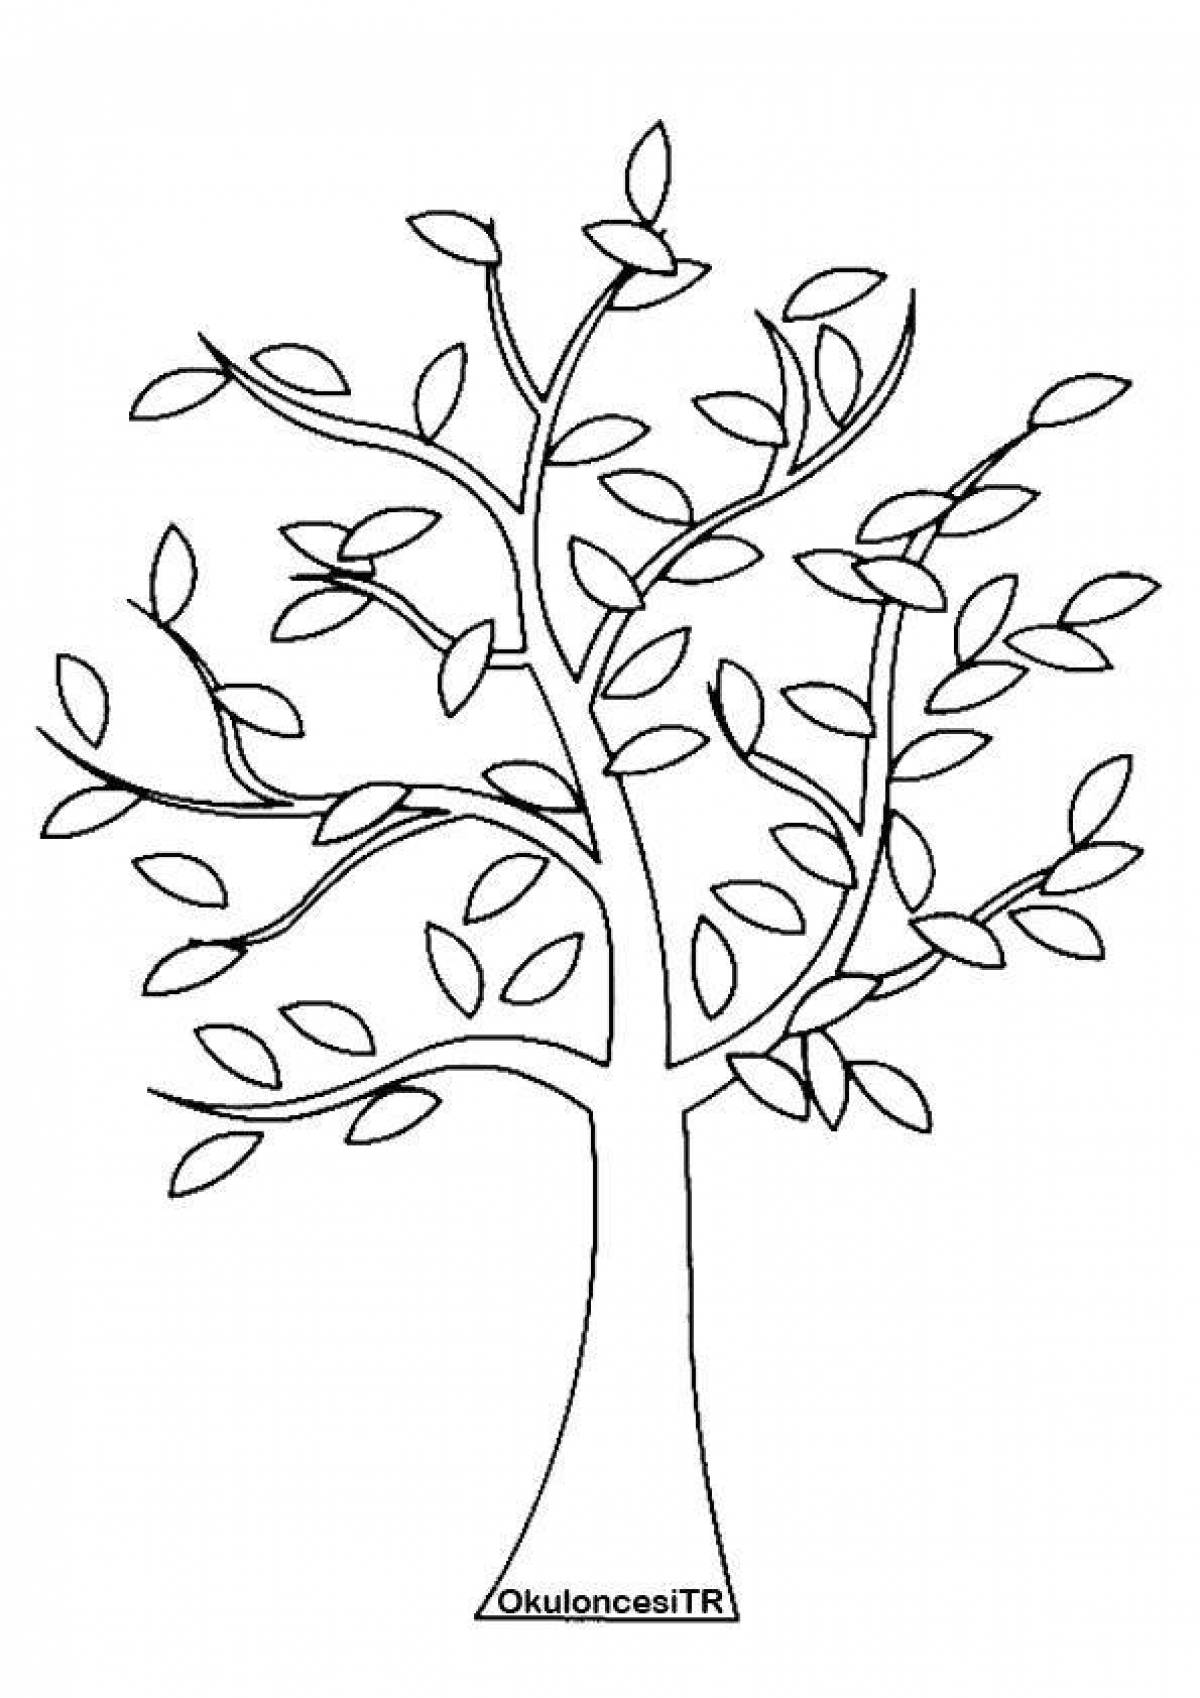 Coloring dream pattern tree